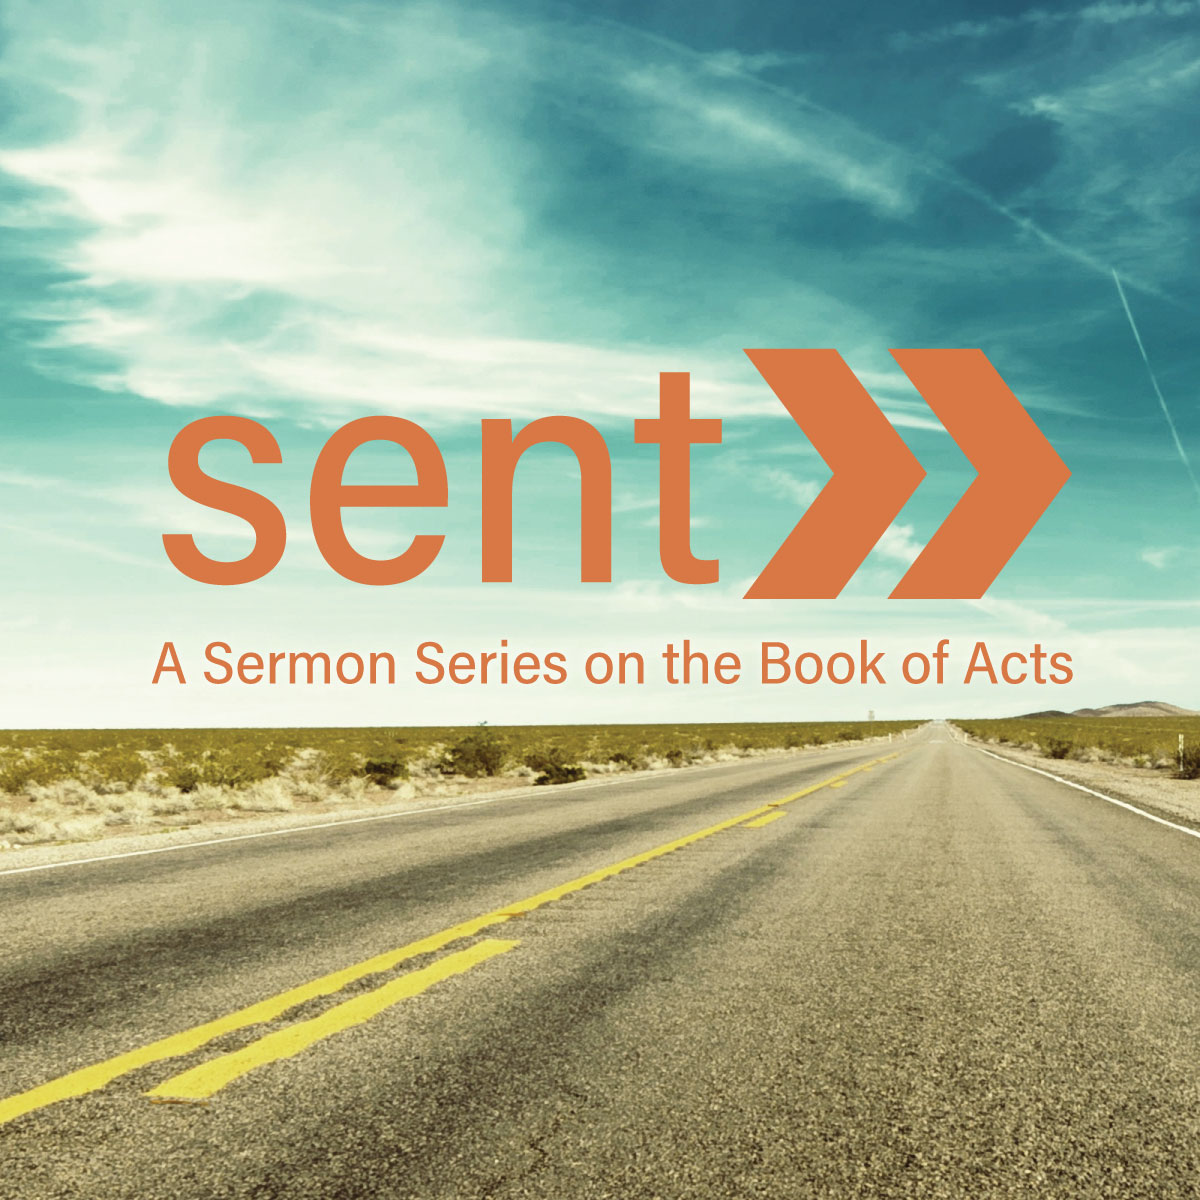 Acts 8:1-25 Persecution Begins